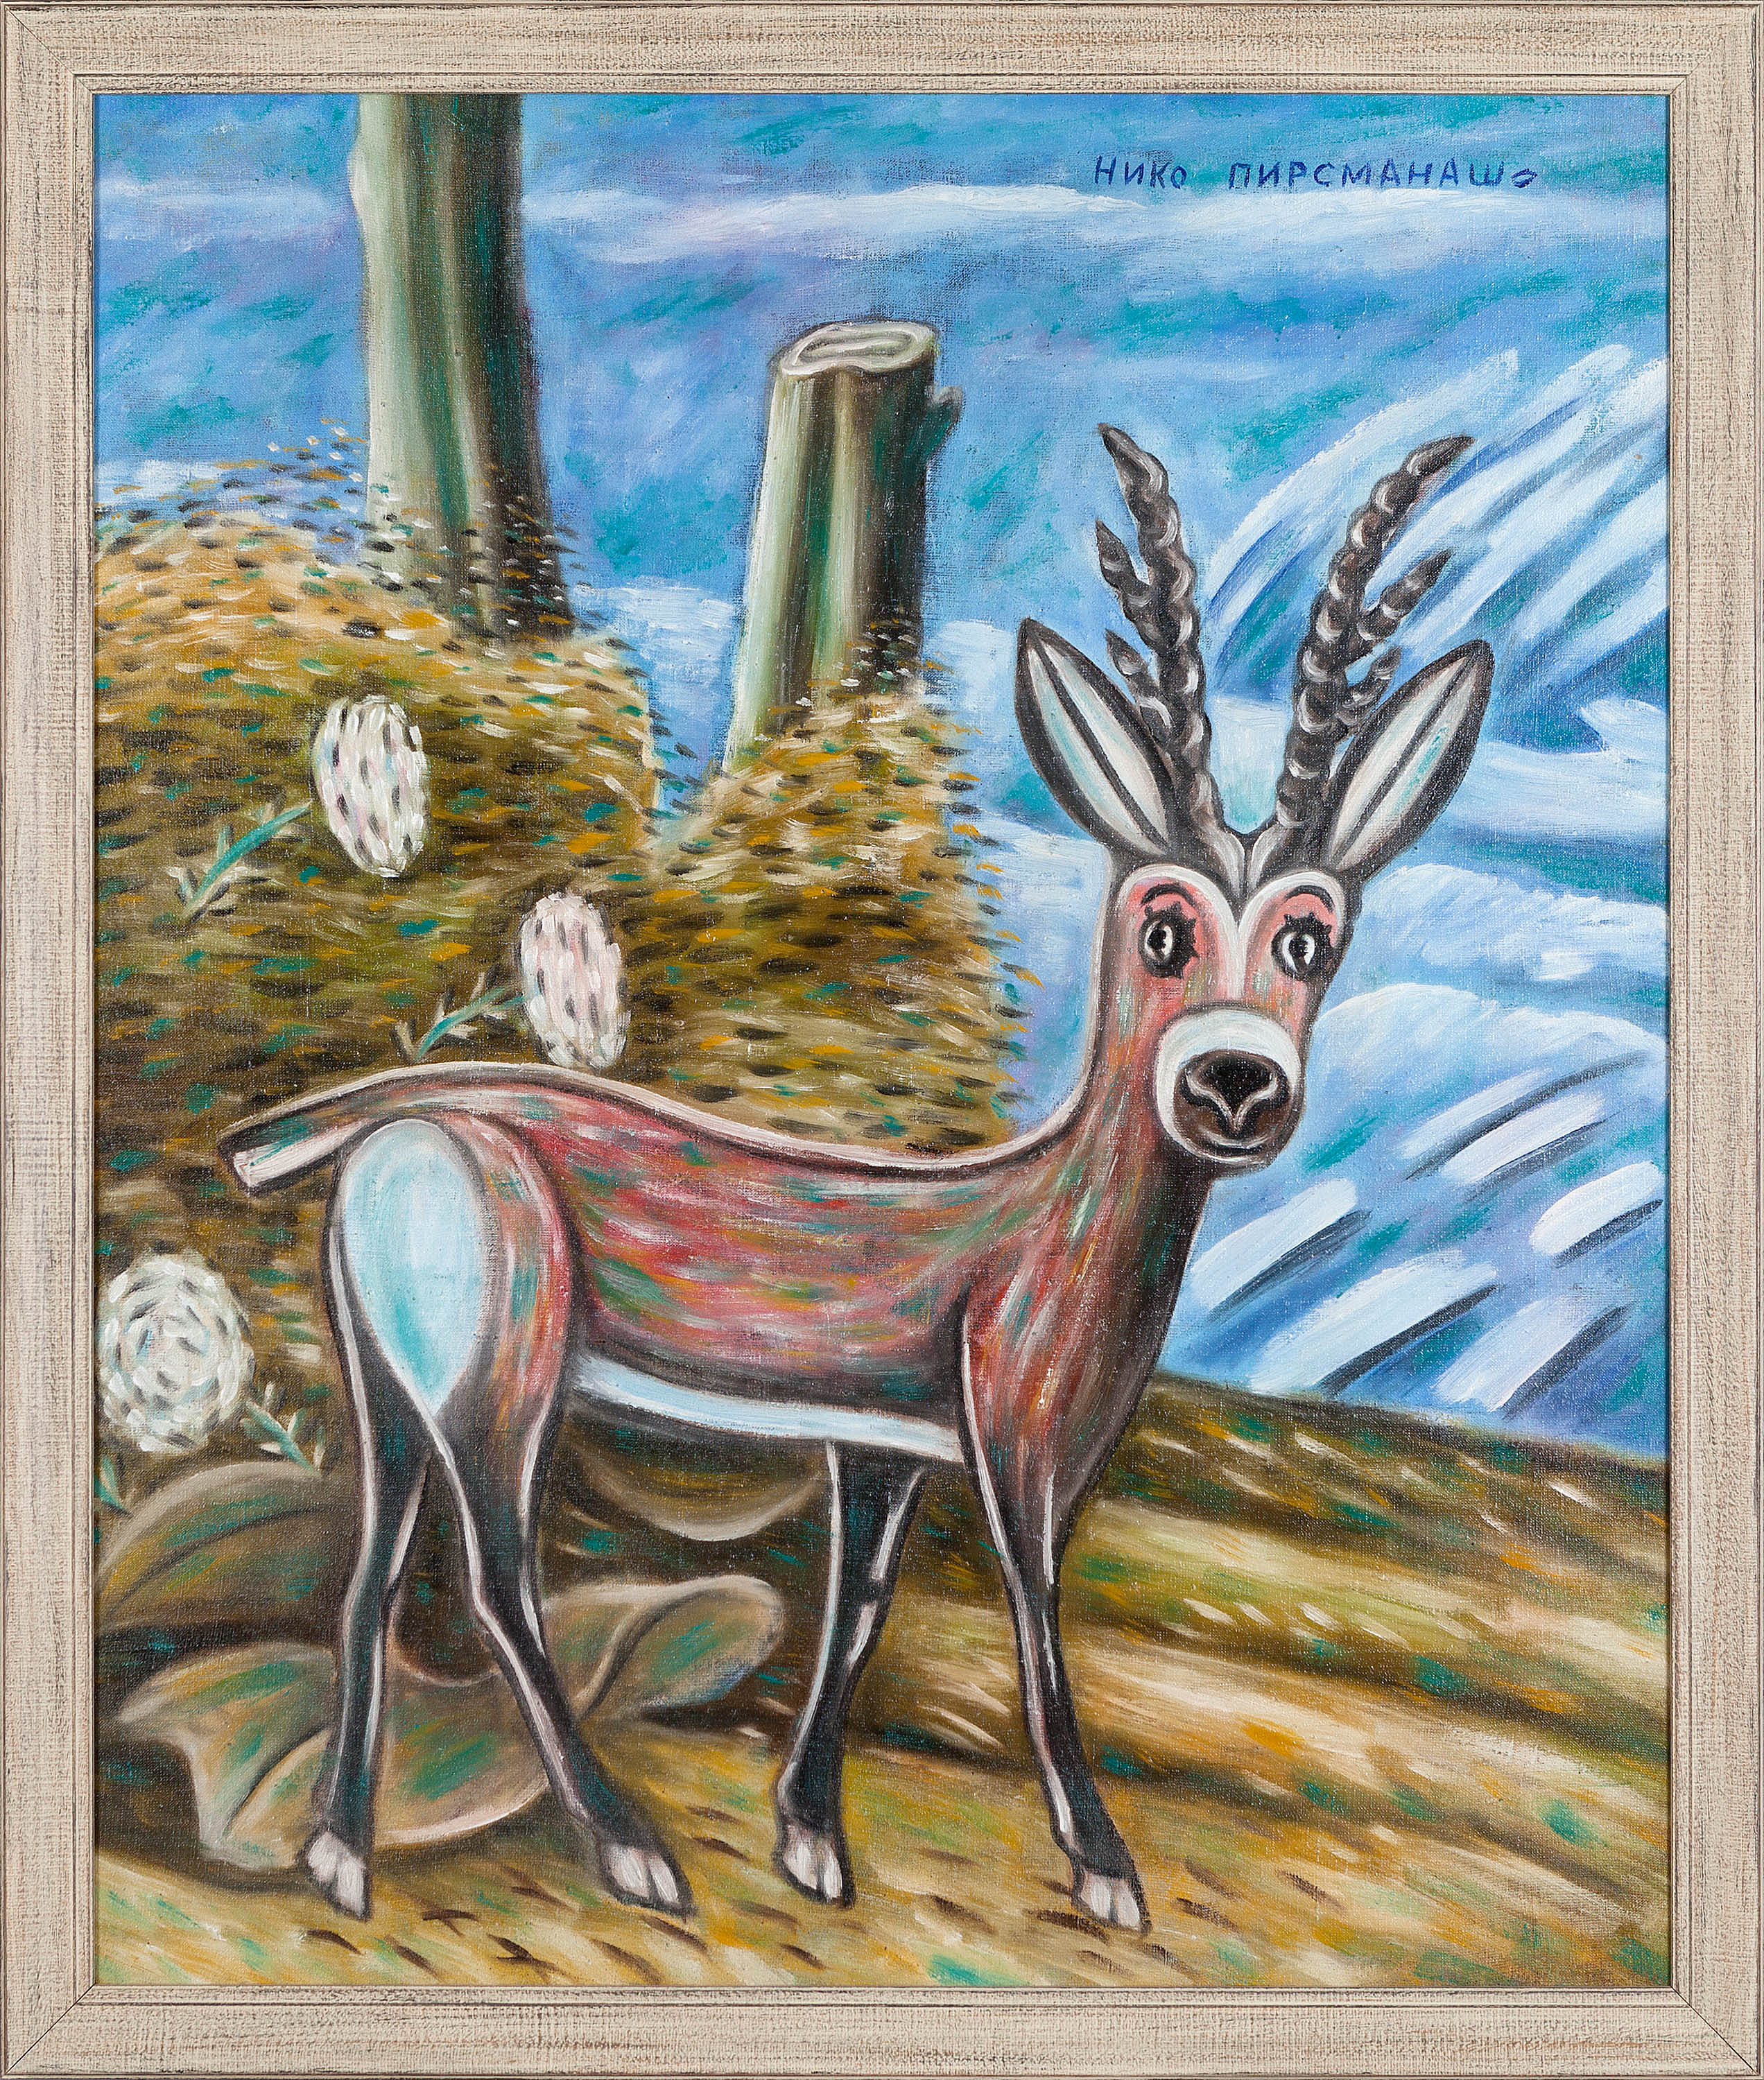 Roe Deer in a Landscape. Copy of Pirosmani's painting